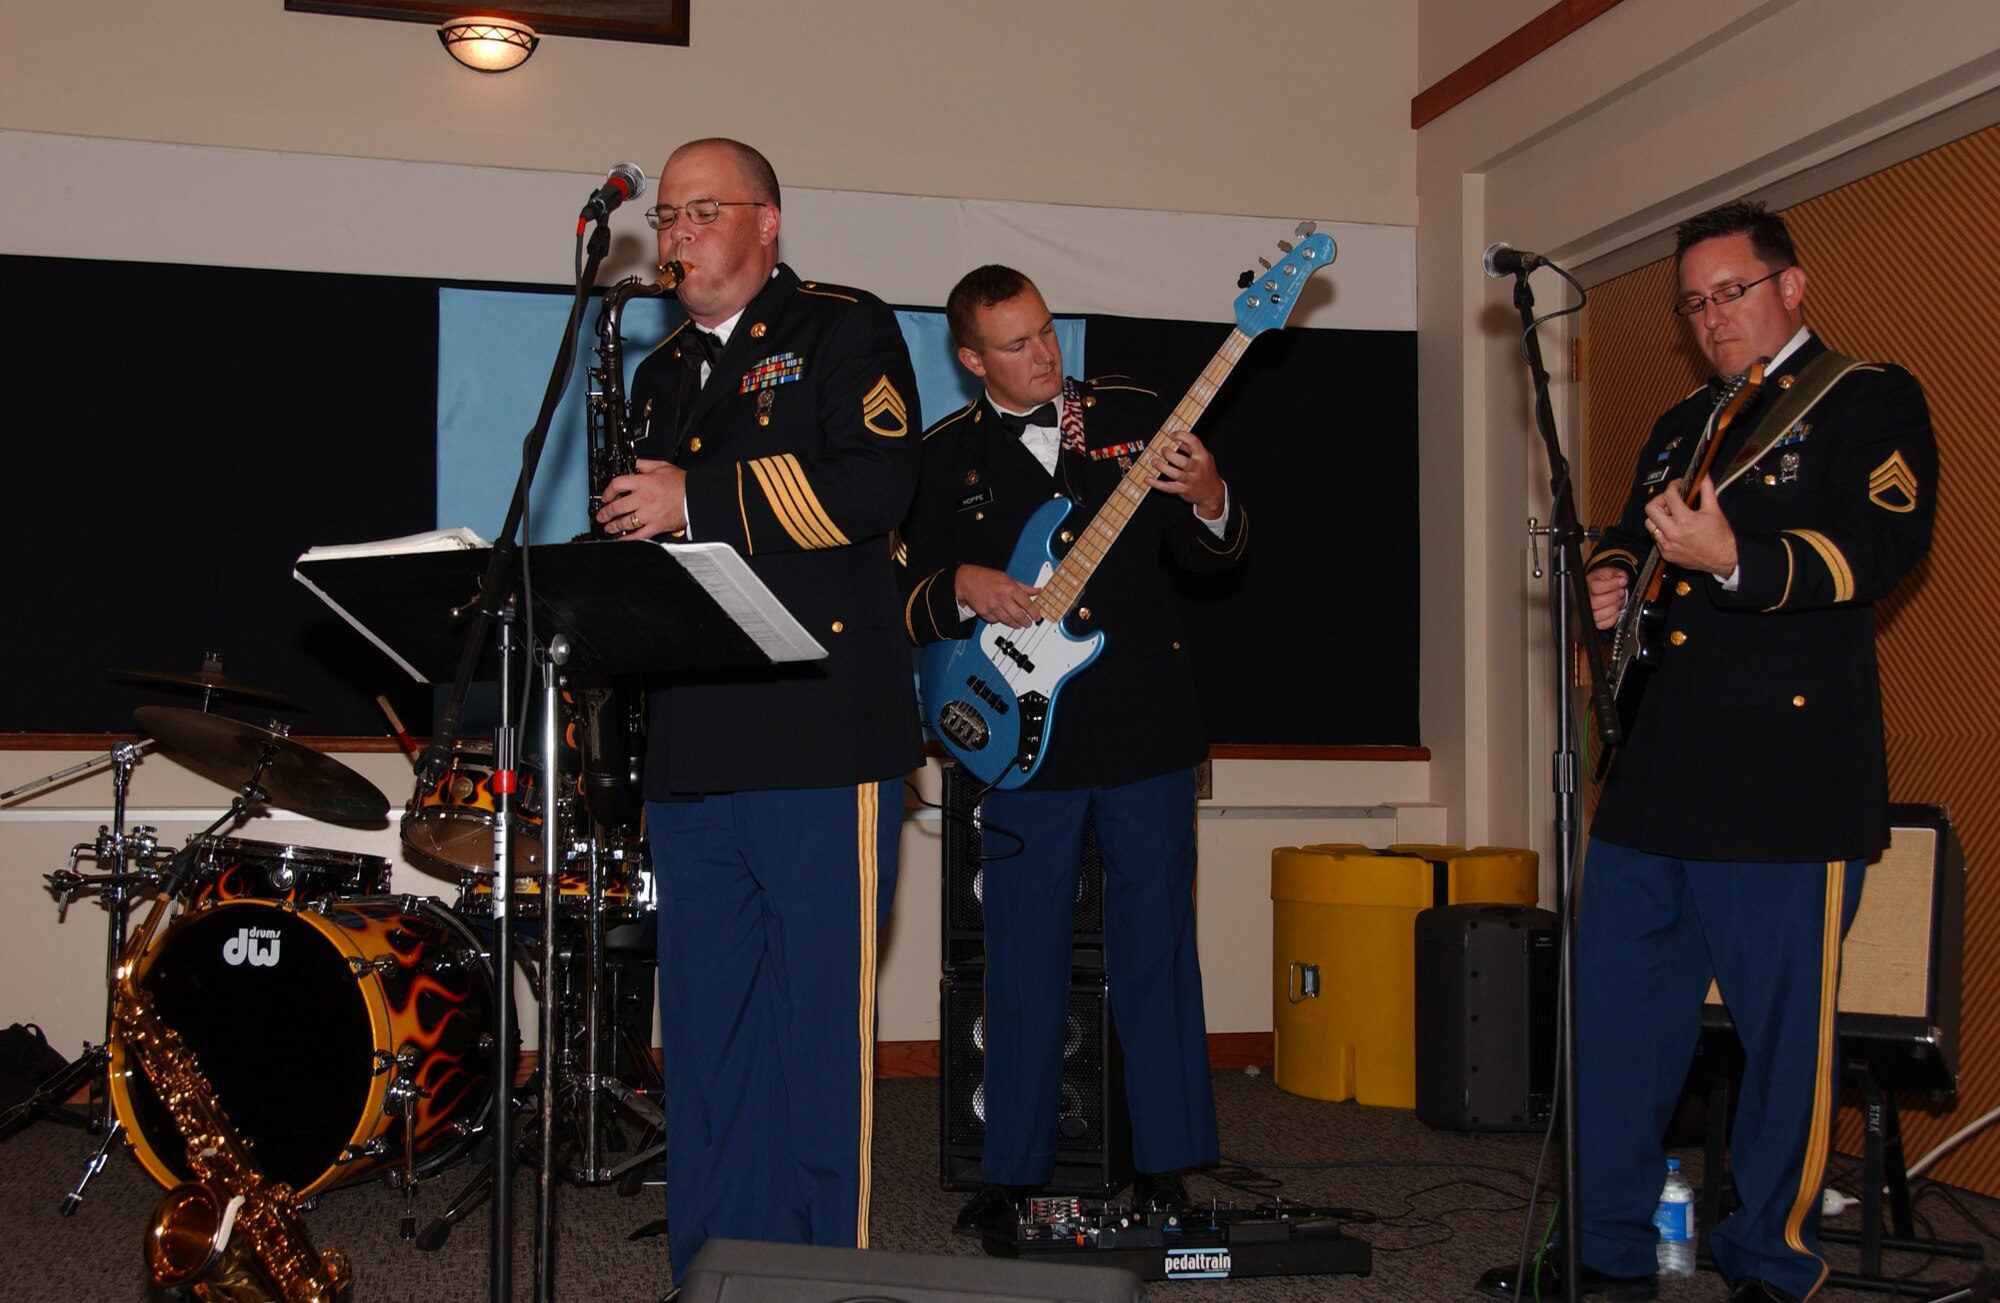 EIELSON AIR FORCE BASE, Alaska -- Providing the evening's entertainment, Fort Wainwright's 9th Army Band ensemble 'Cold Fusion' played traditional jazz, funk and contemporary rock throughout the evening.
 (U.S. Air Force Photo by Airman 1st Class Jonathan Snyder)